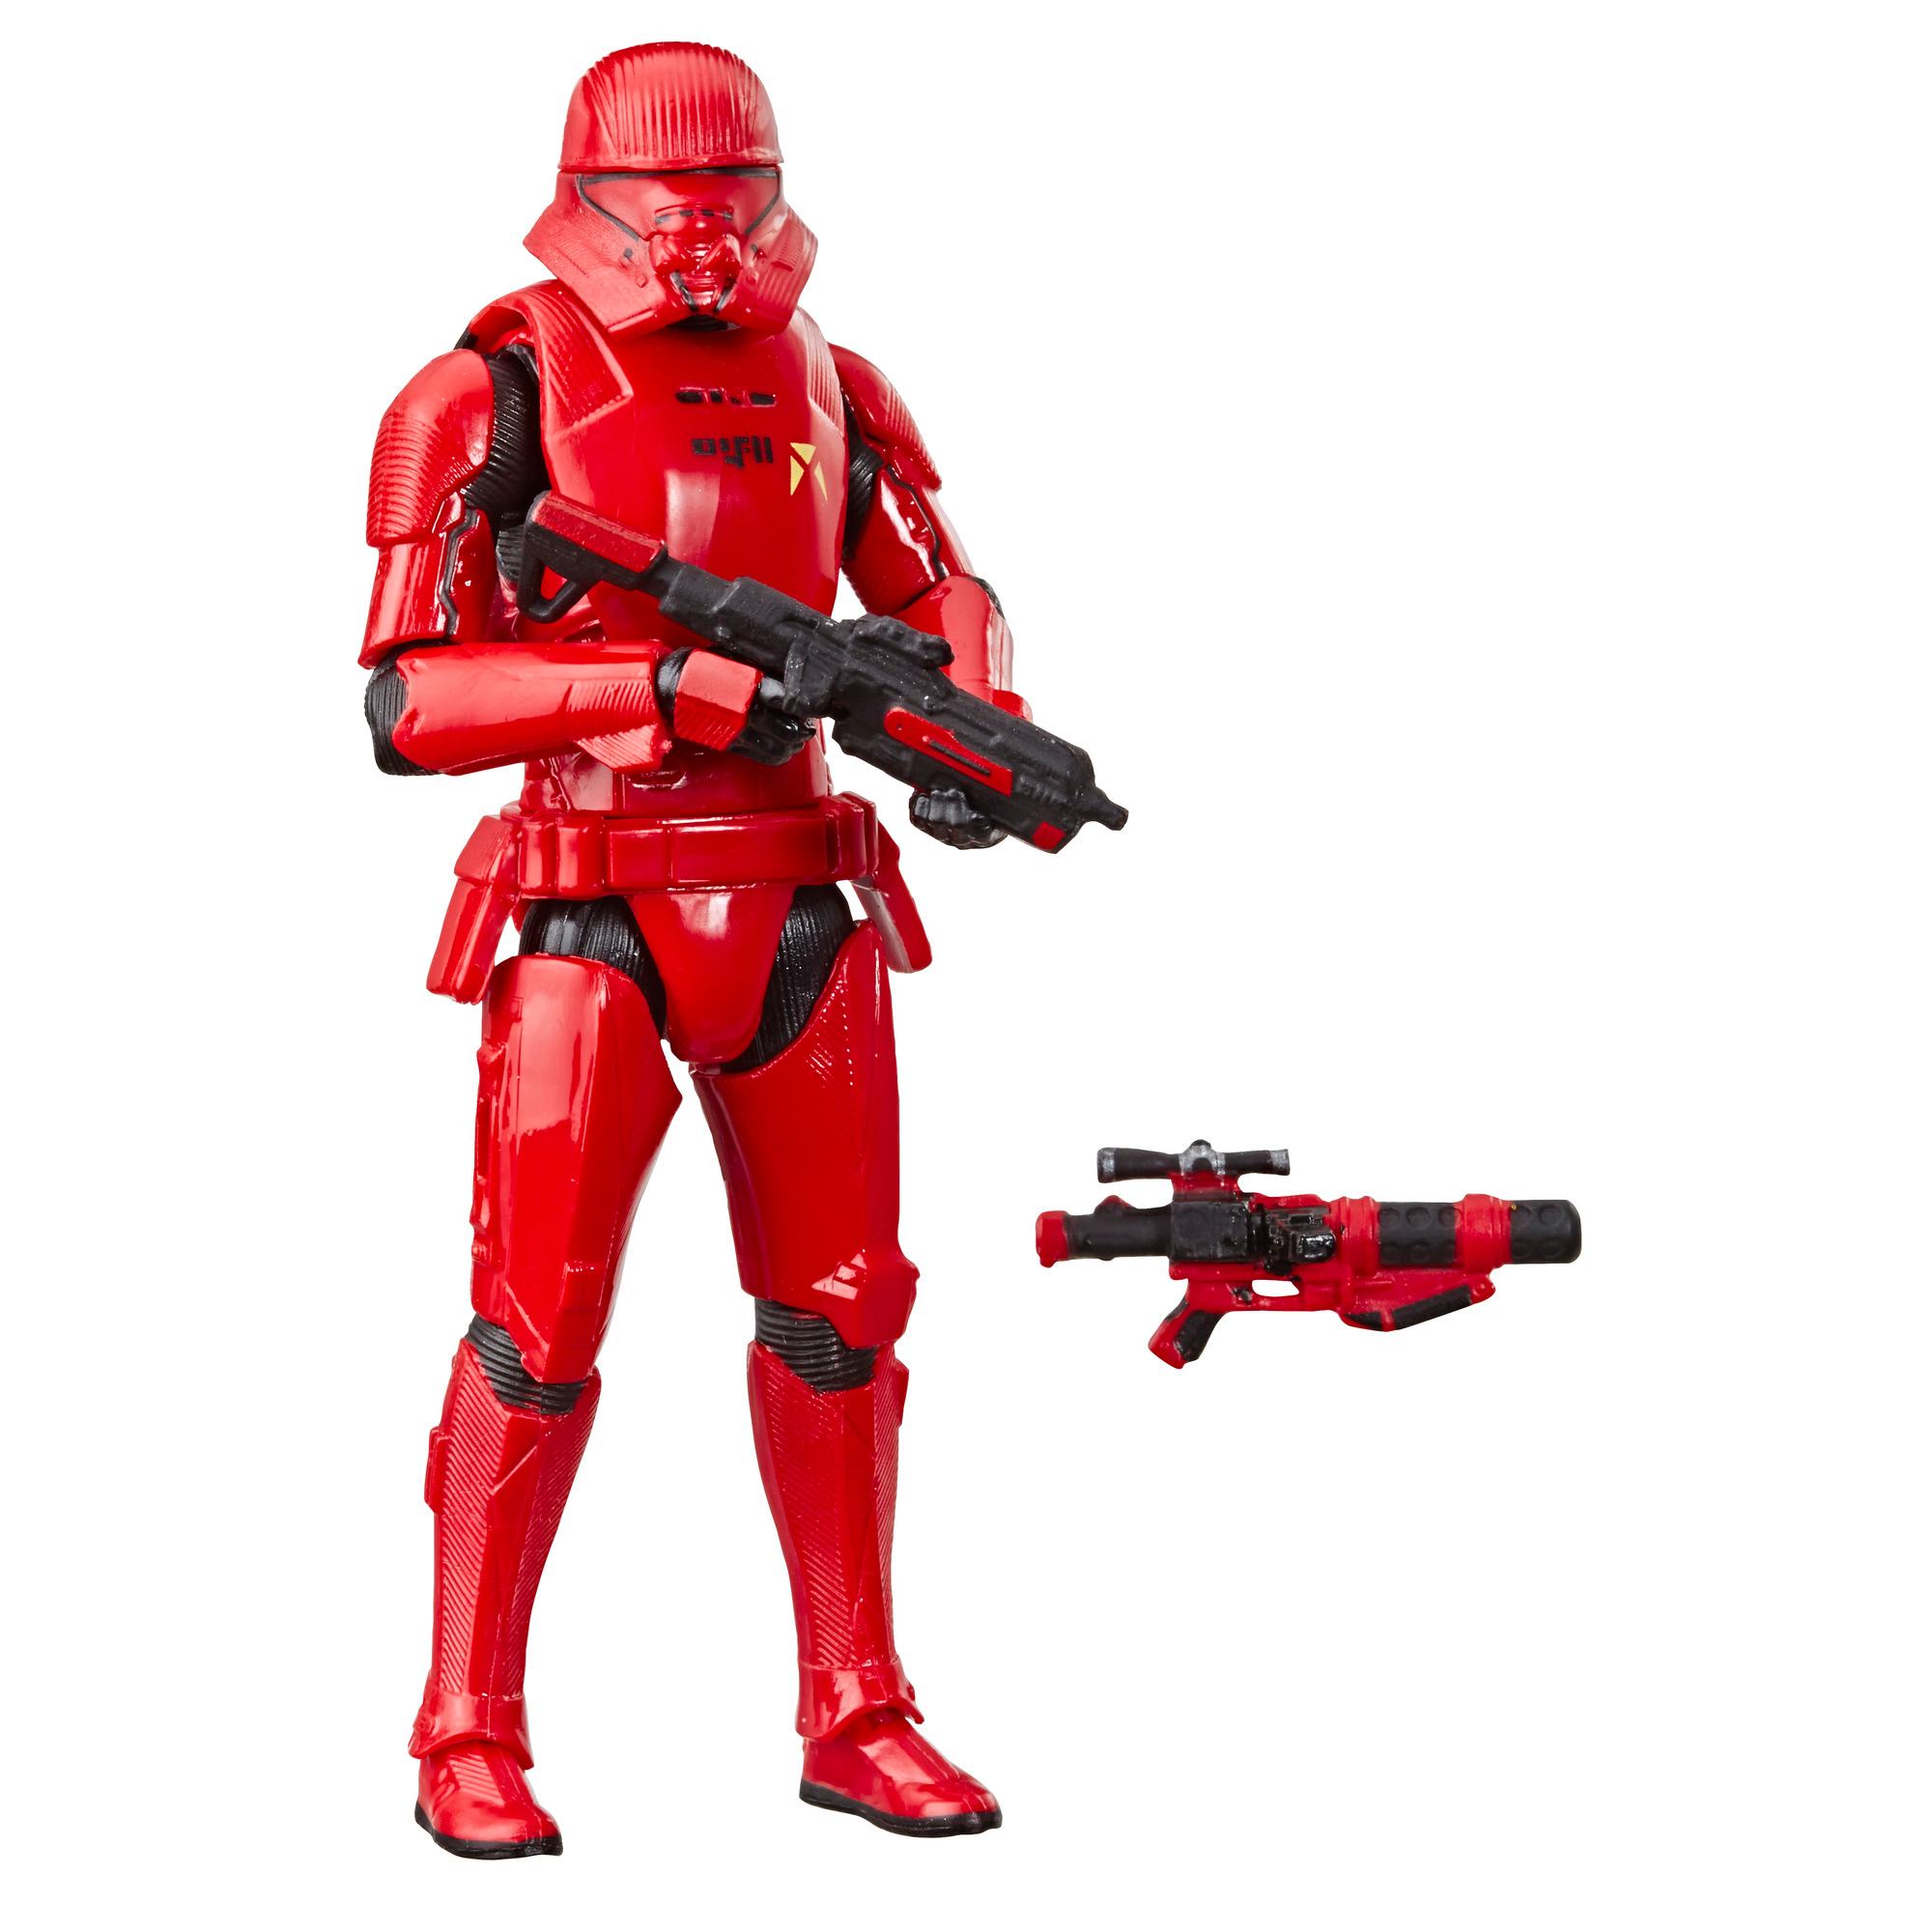 Star Wars The Vintage Collection Star Wars: The Rise of Skywalker Sith Jet Trooper Toy, 3.75-inch Scale Figure, 4 and Up